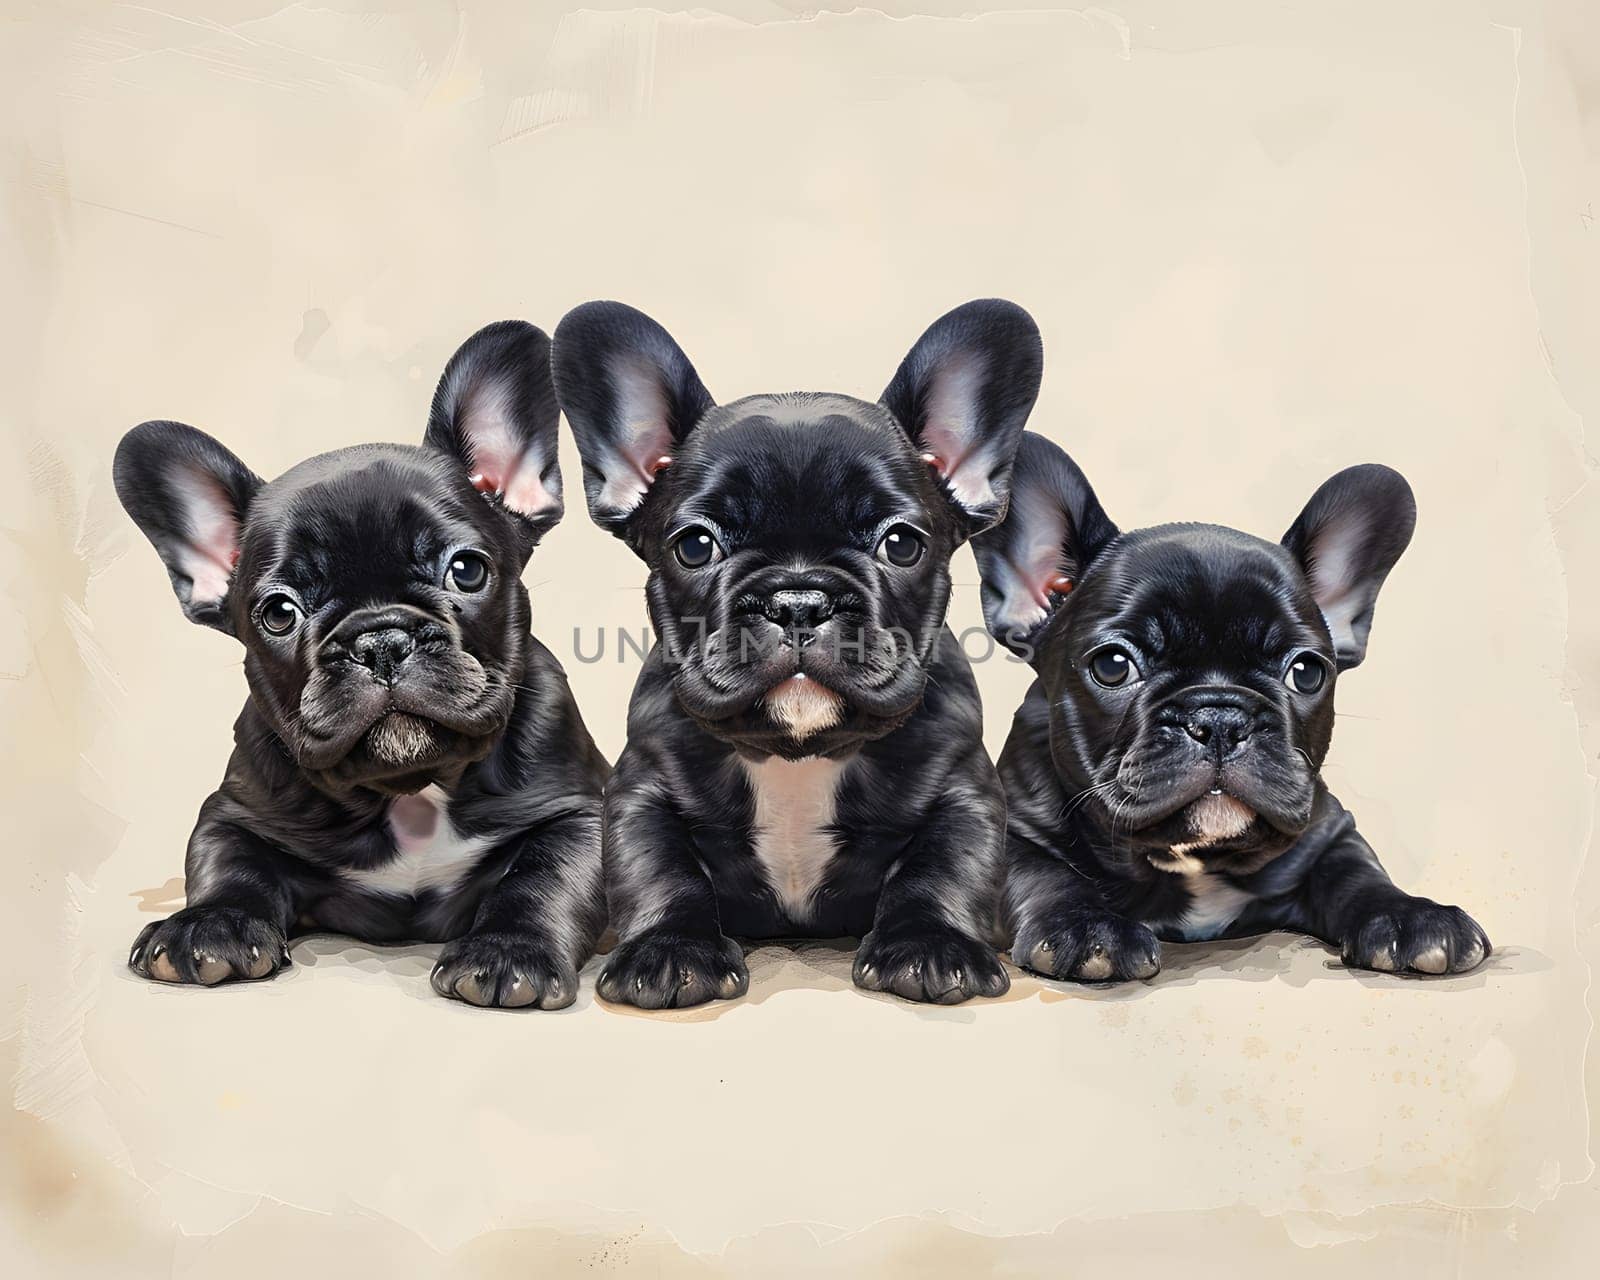 Three black French Bulldogs resting together on a beige surface by Nadtochiy